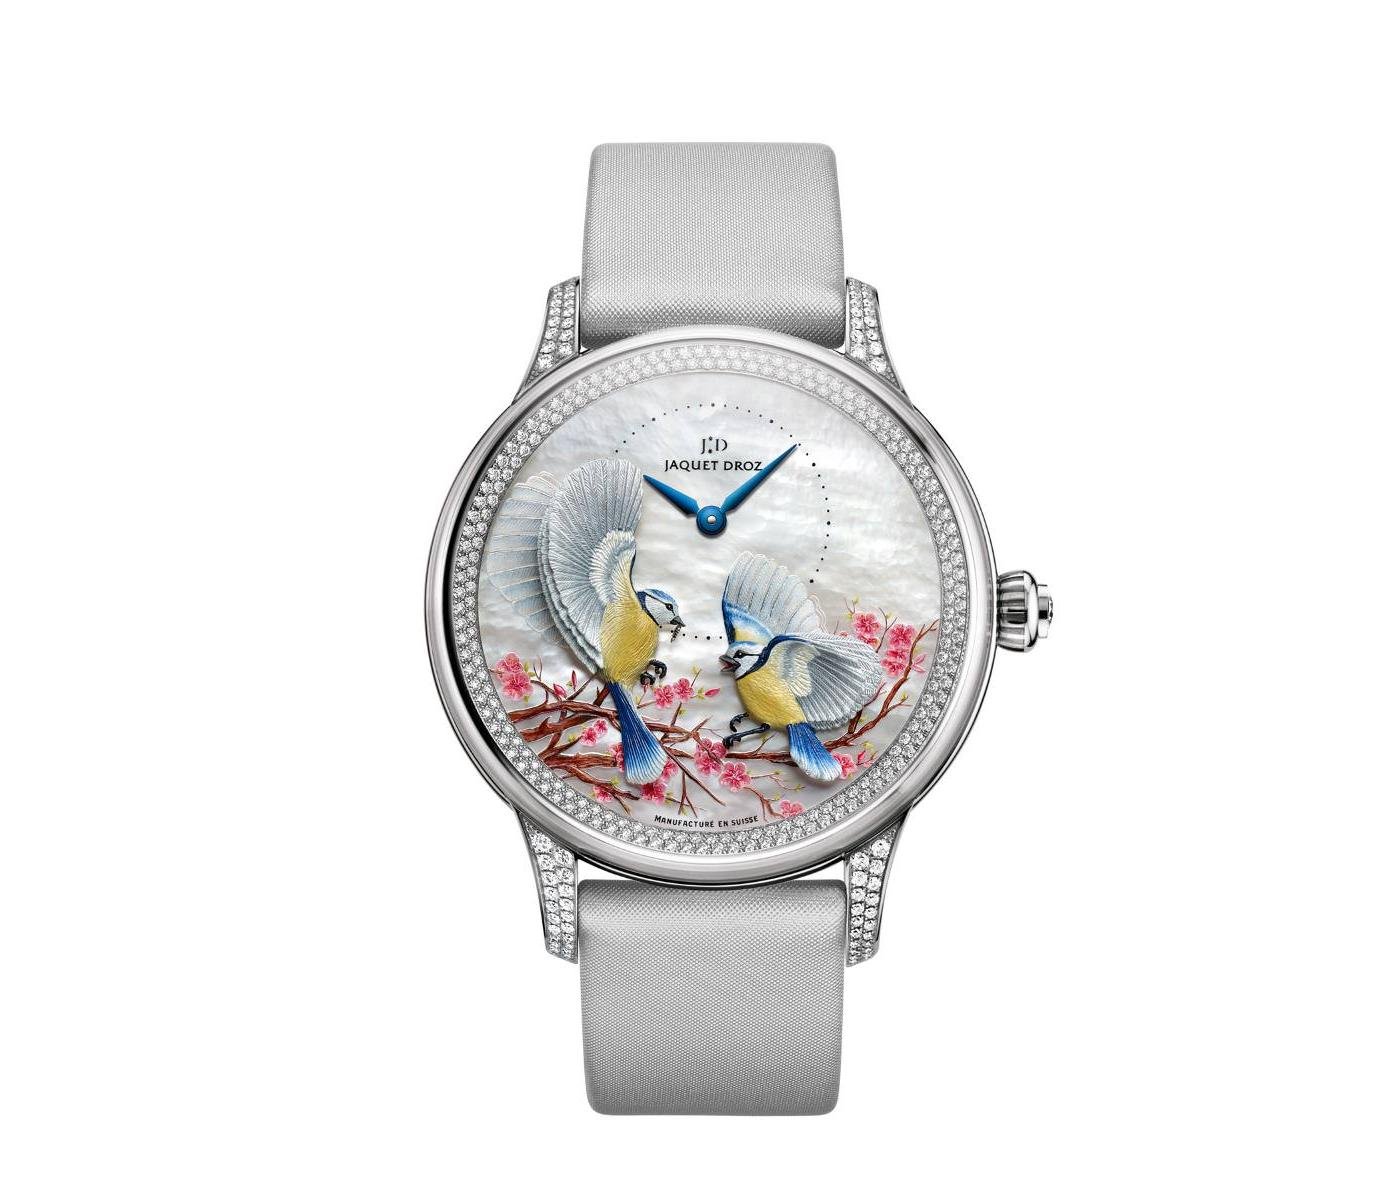 Watch by Jaquet Droz